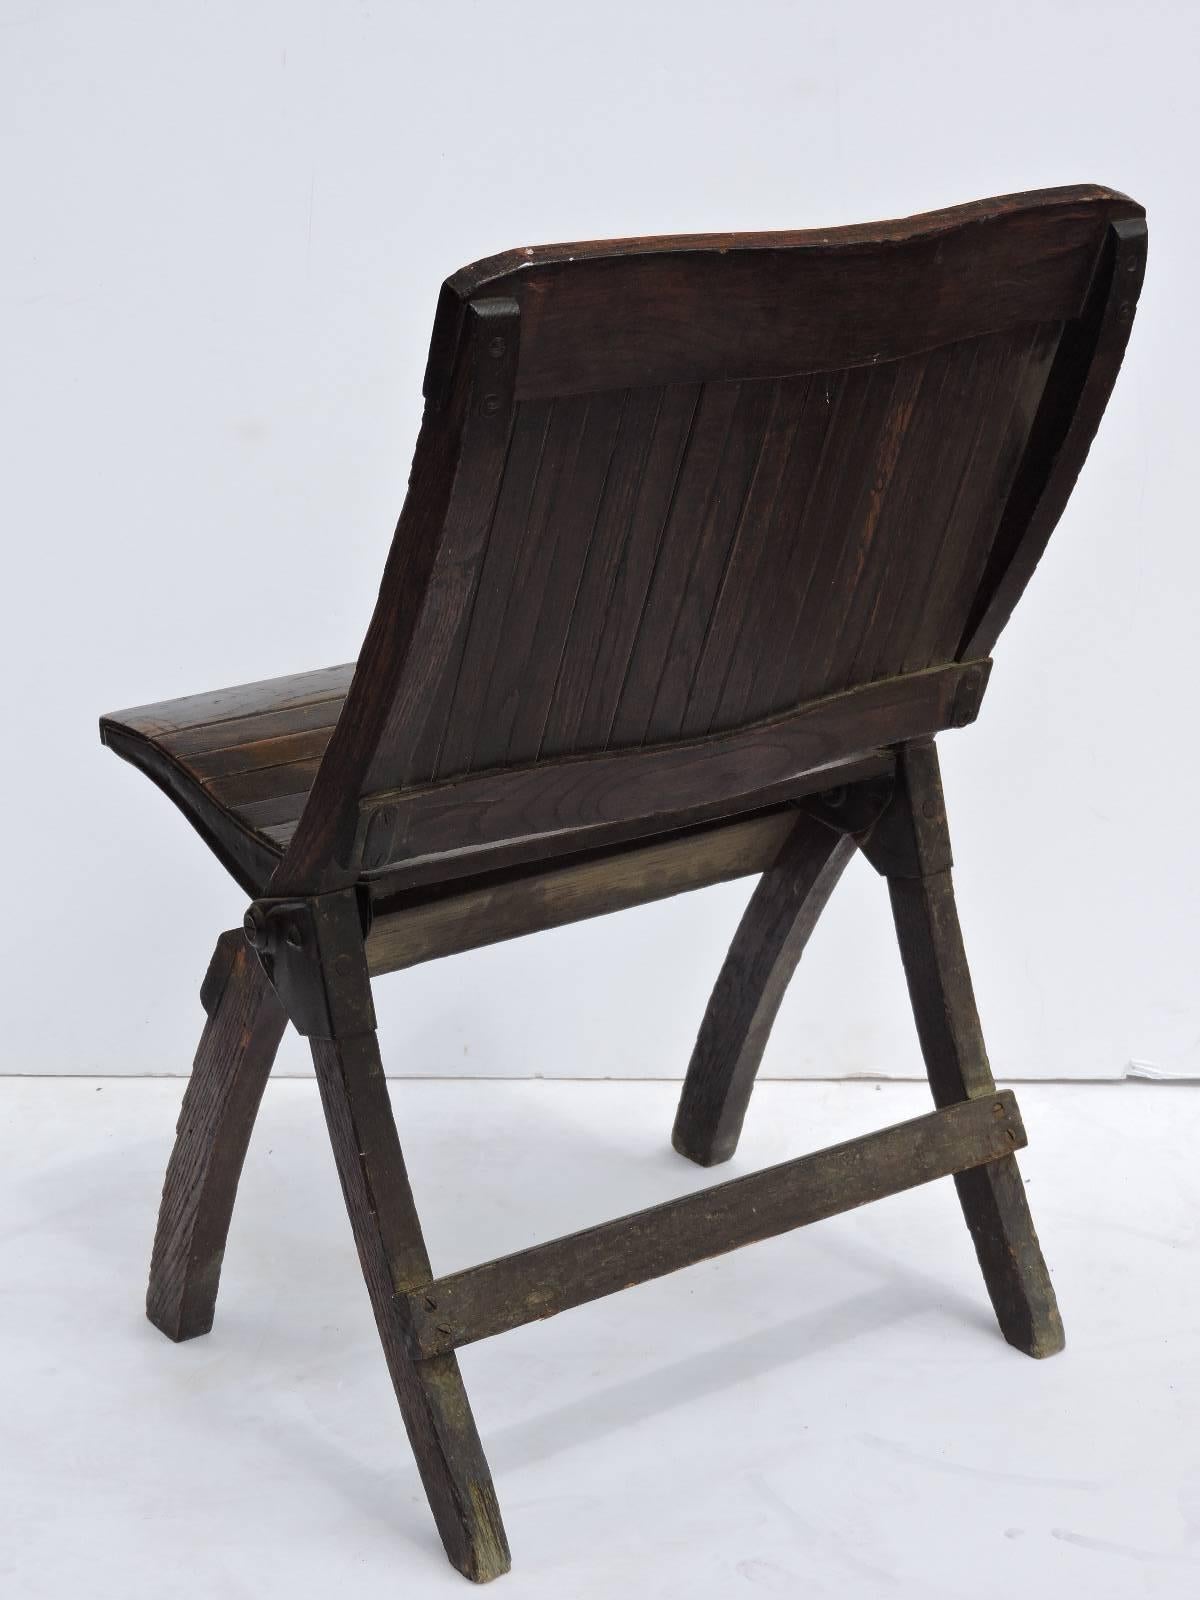 American Antique Slatted Wood and Steel Folding Chairs